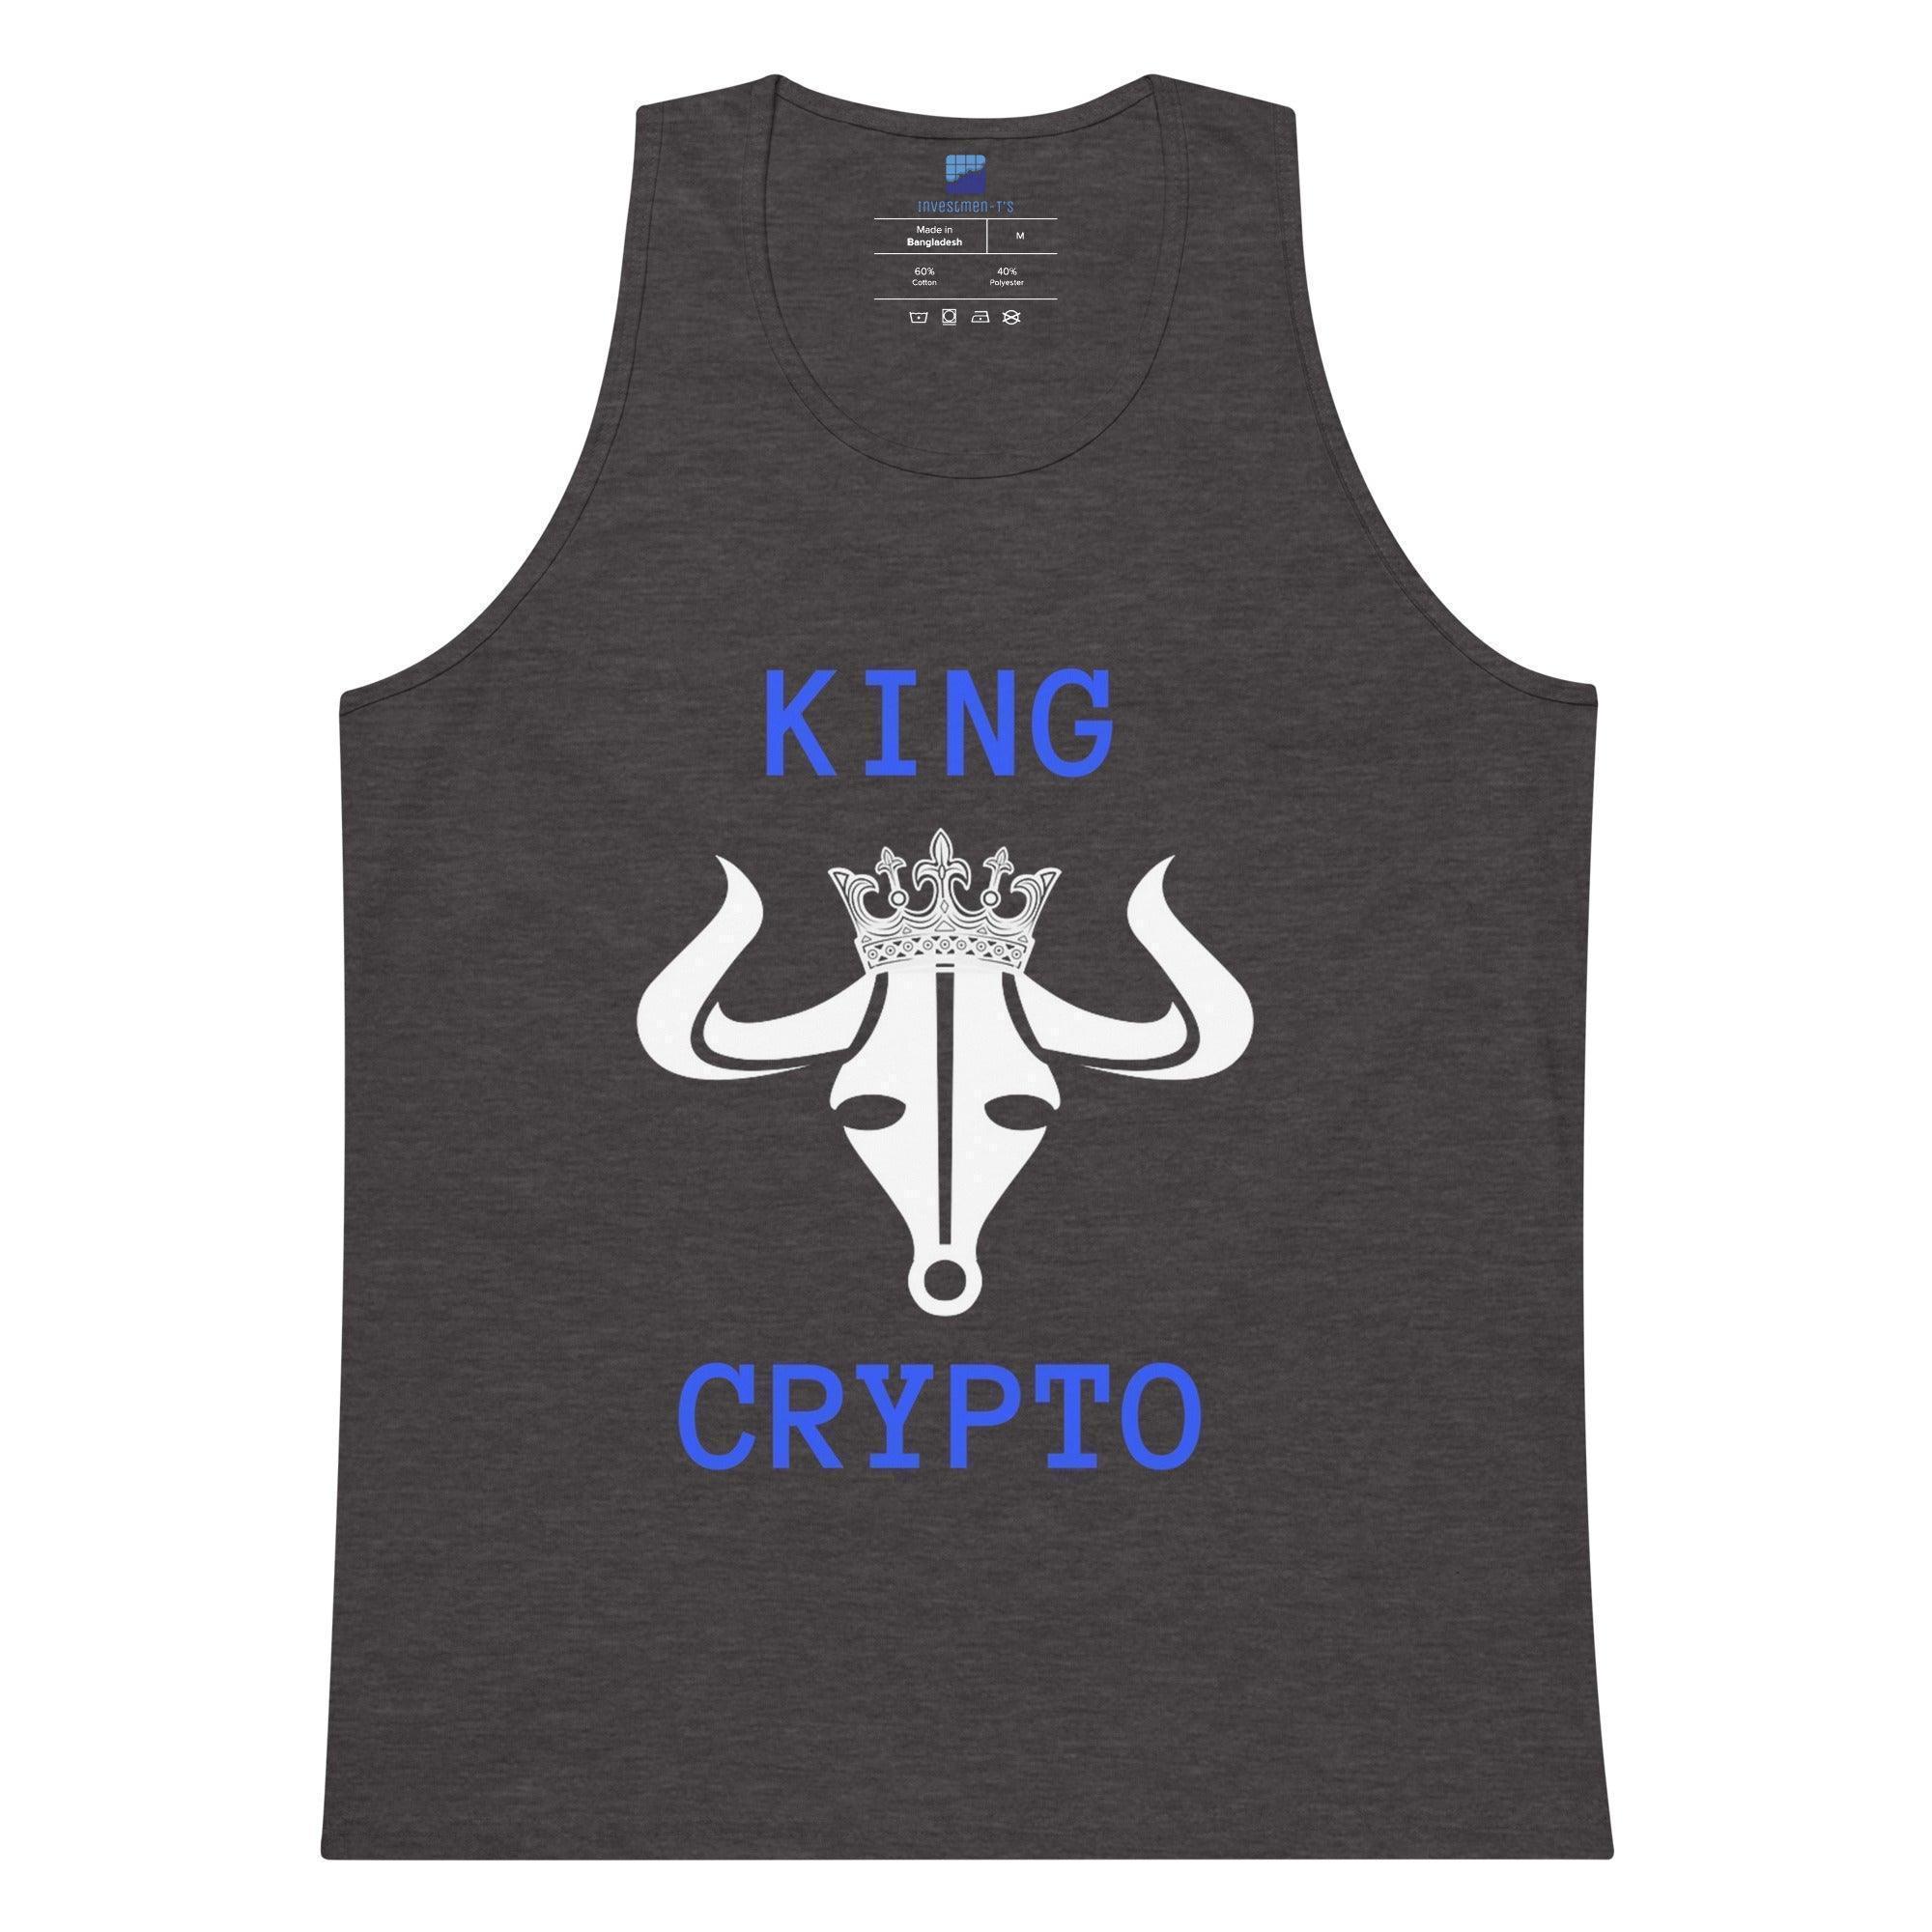 King Crypto Tank Top - InvestmenTees